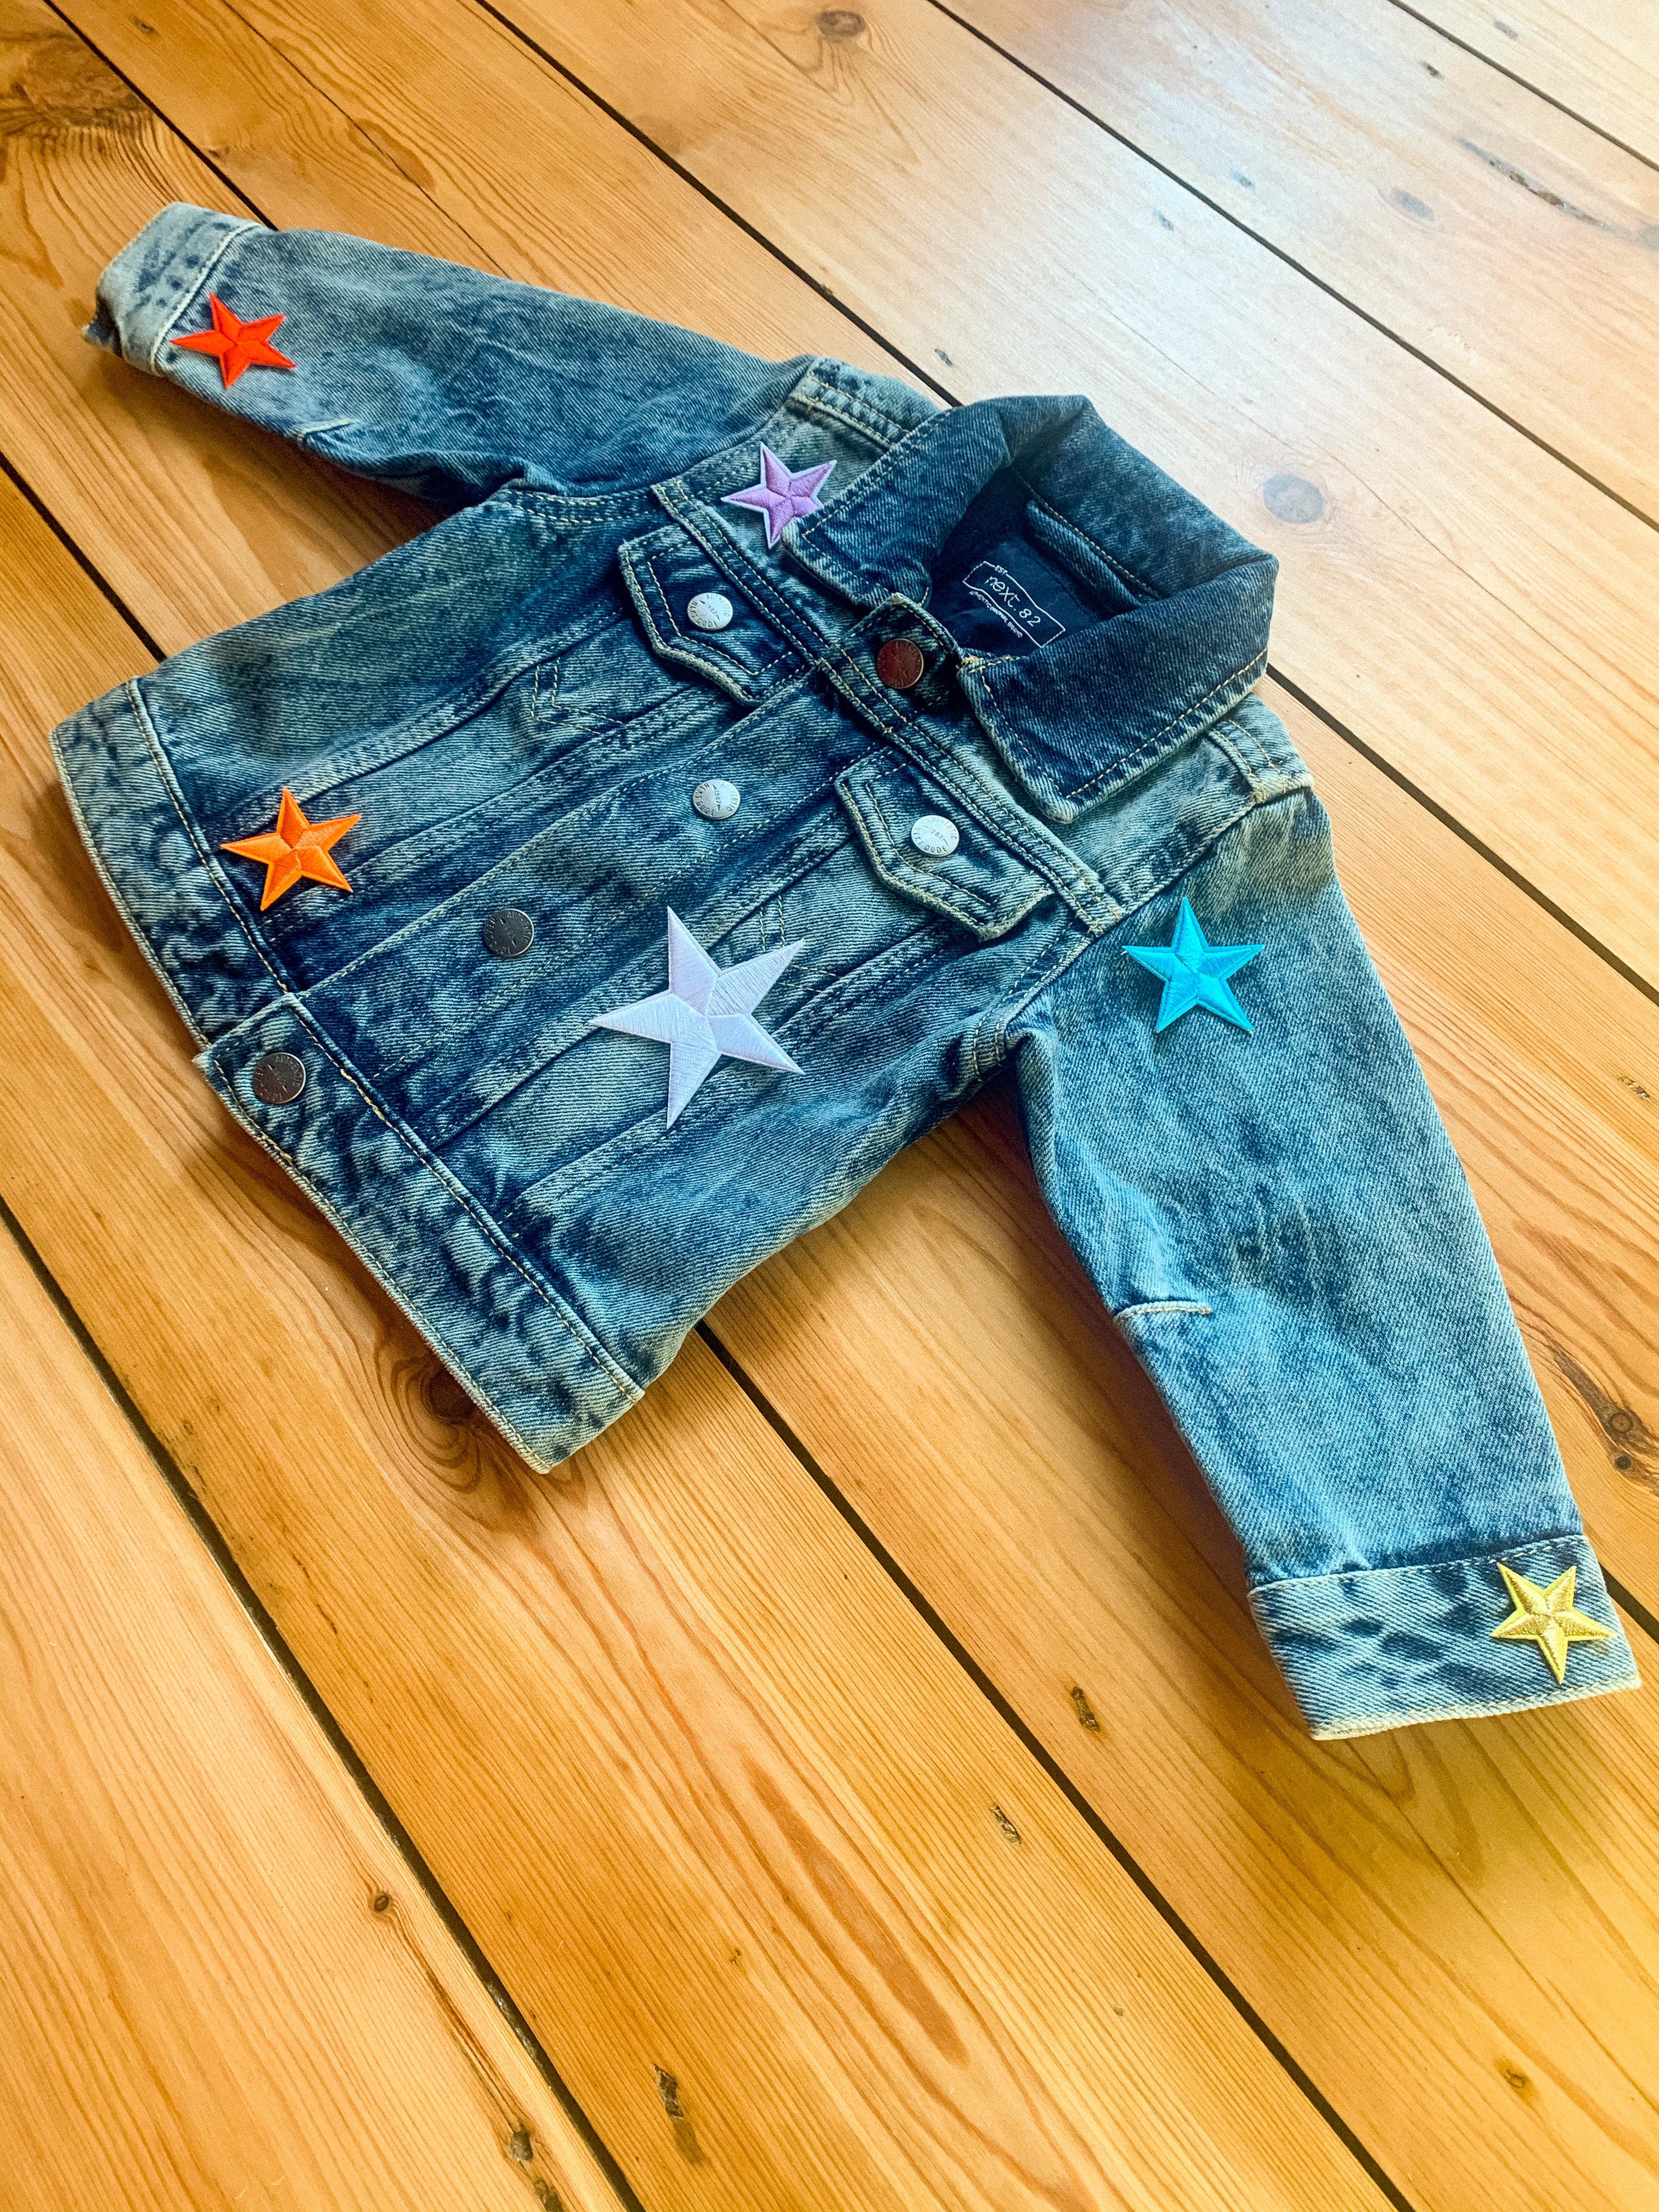 Personalised Name Patch Denim Jacket Star Patches